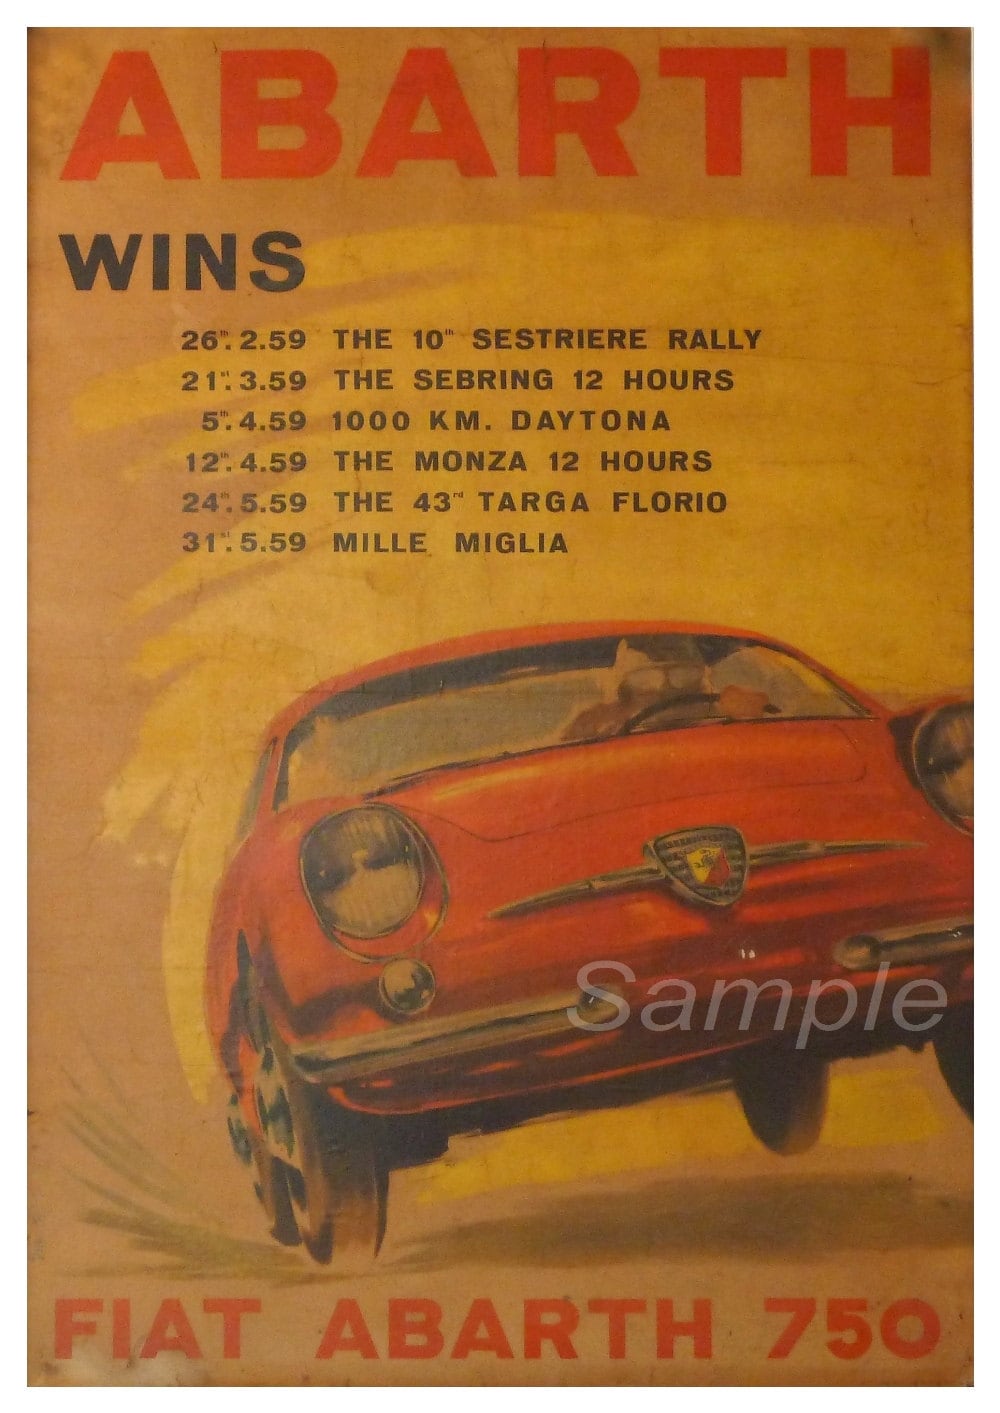 VINTAGE FIAT ABARTH RACING A4 POSTER PRINT